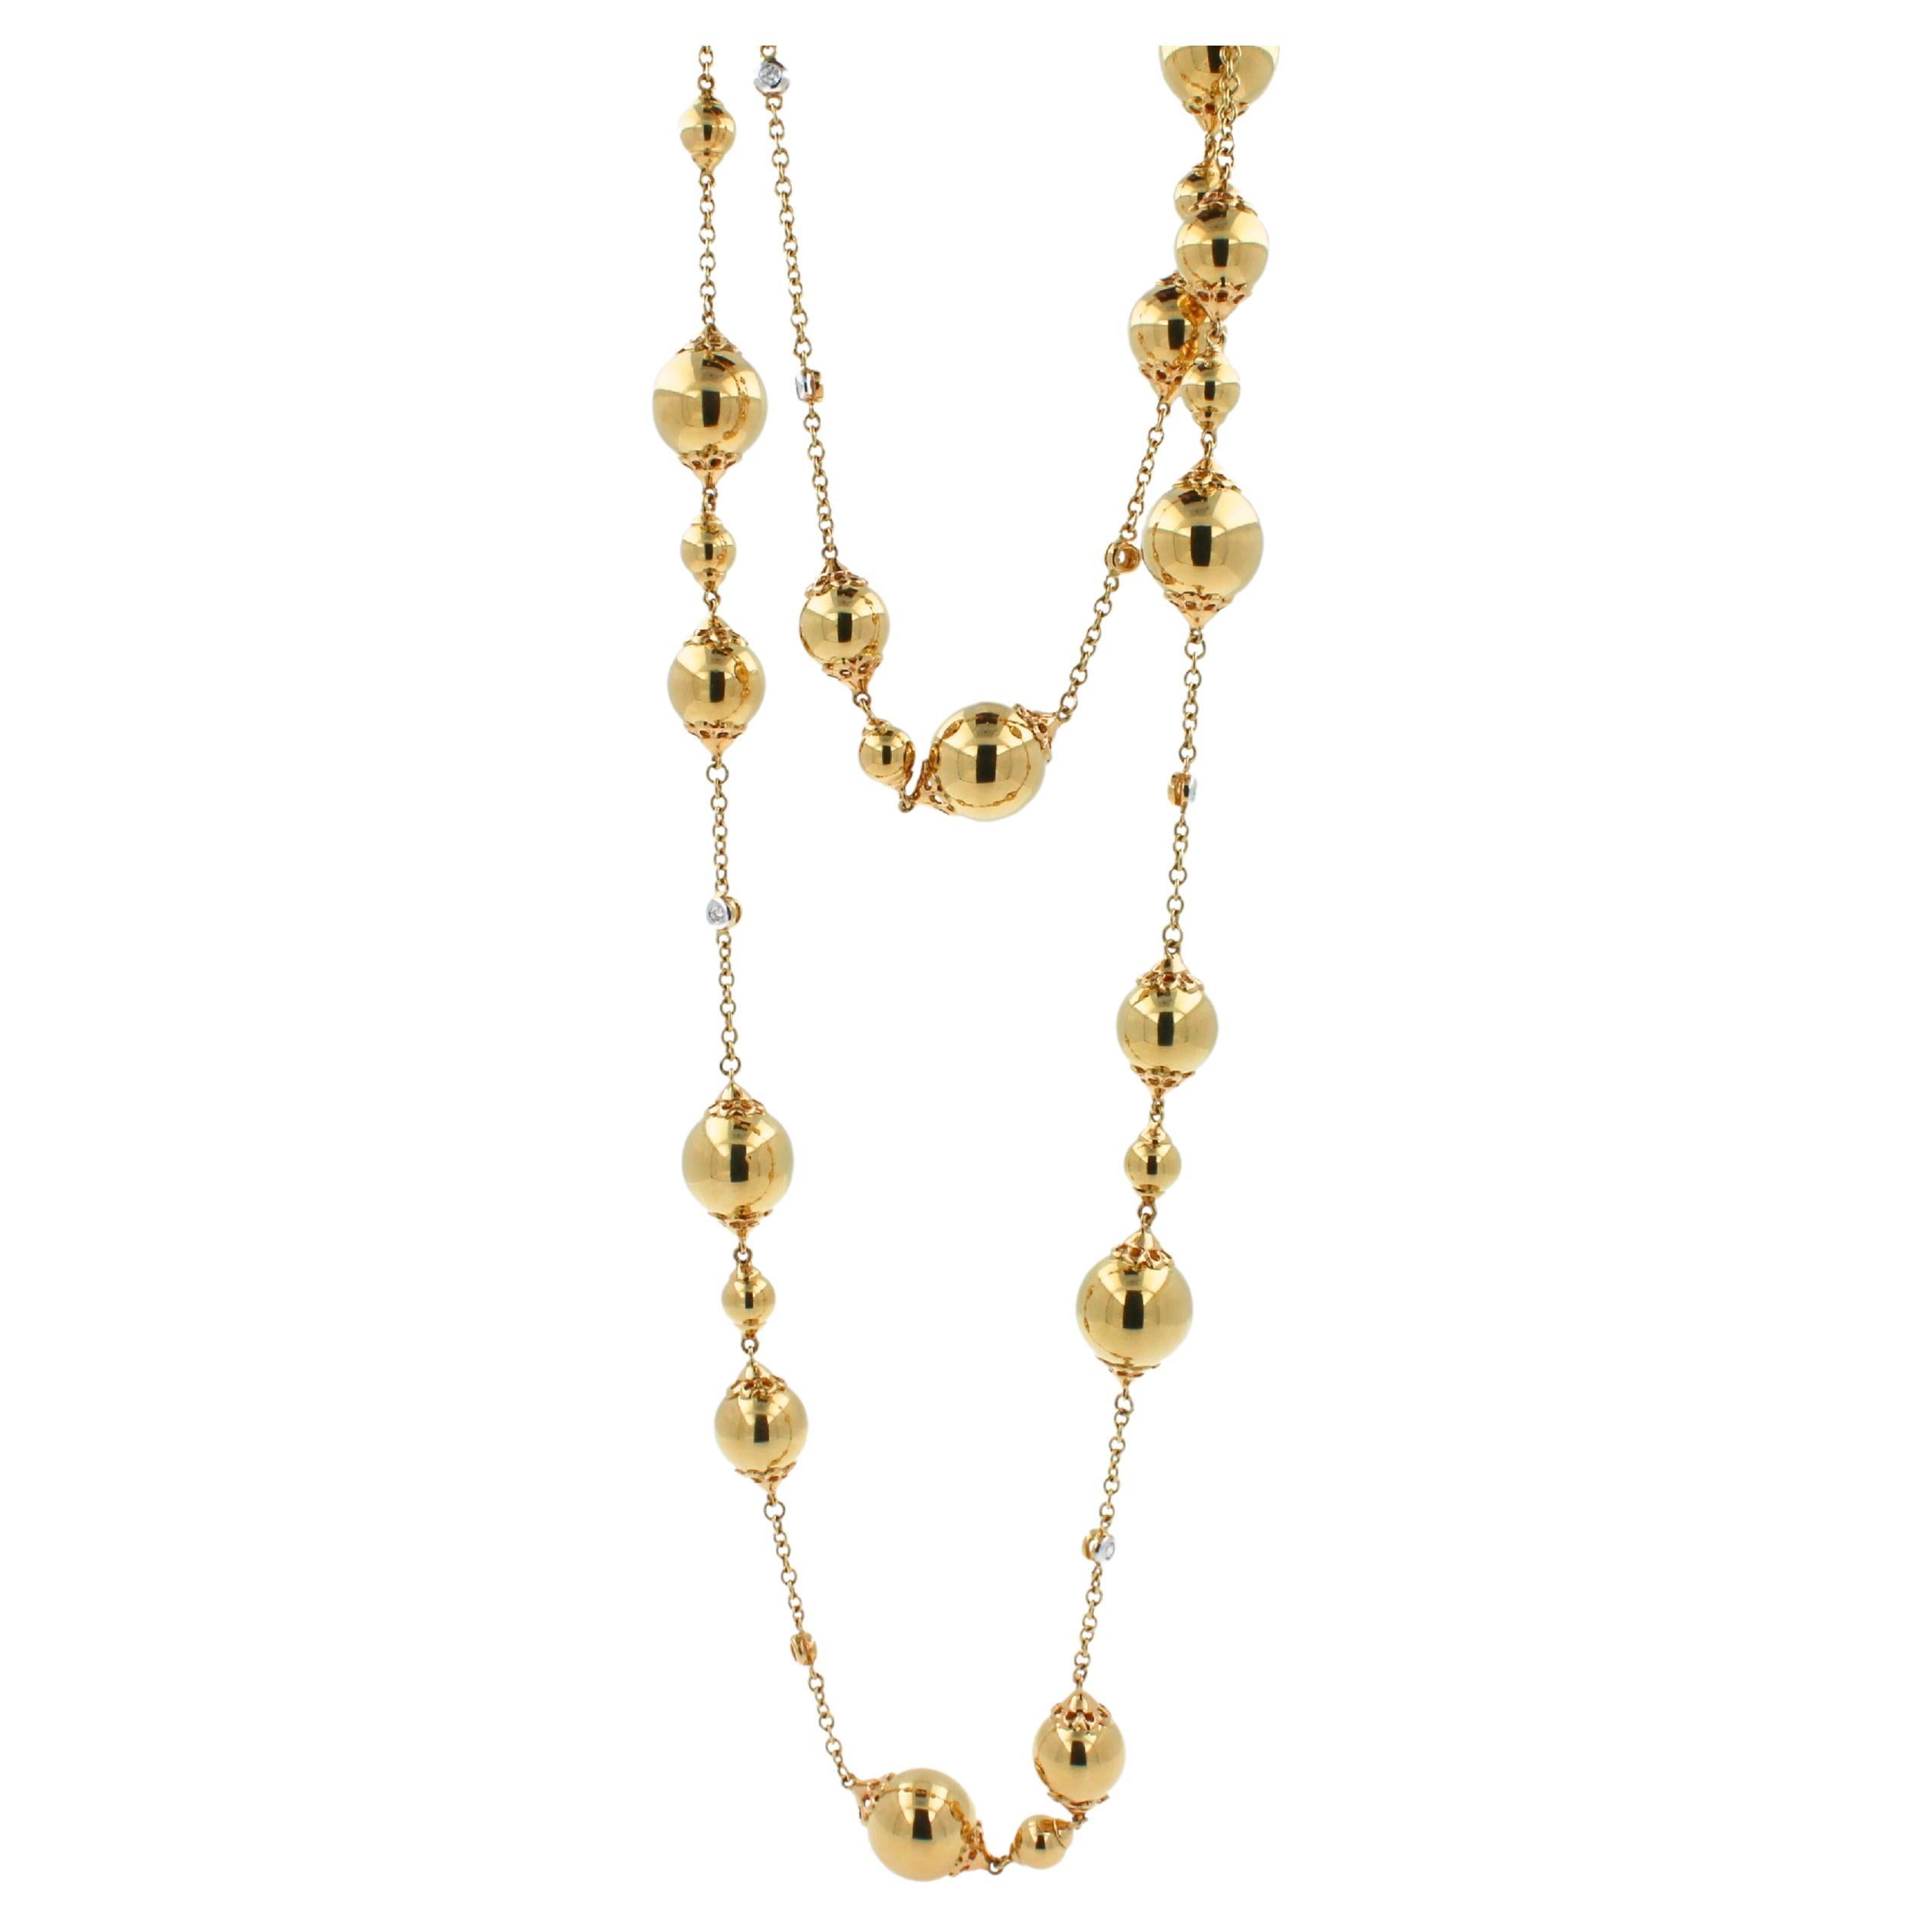 Golden Celestial Planets Spheres Globes Diamonds 18k Yellow Gold Long Necklace